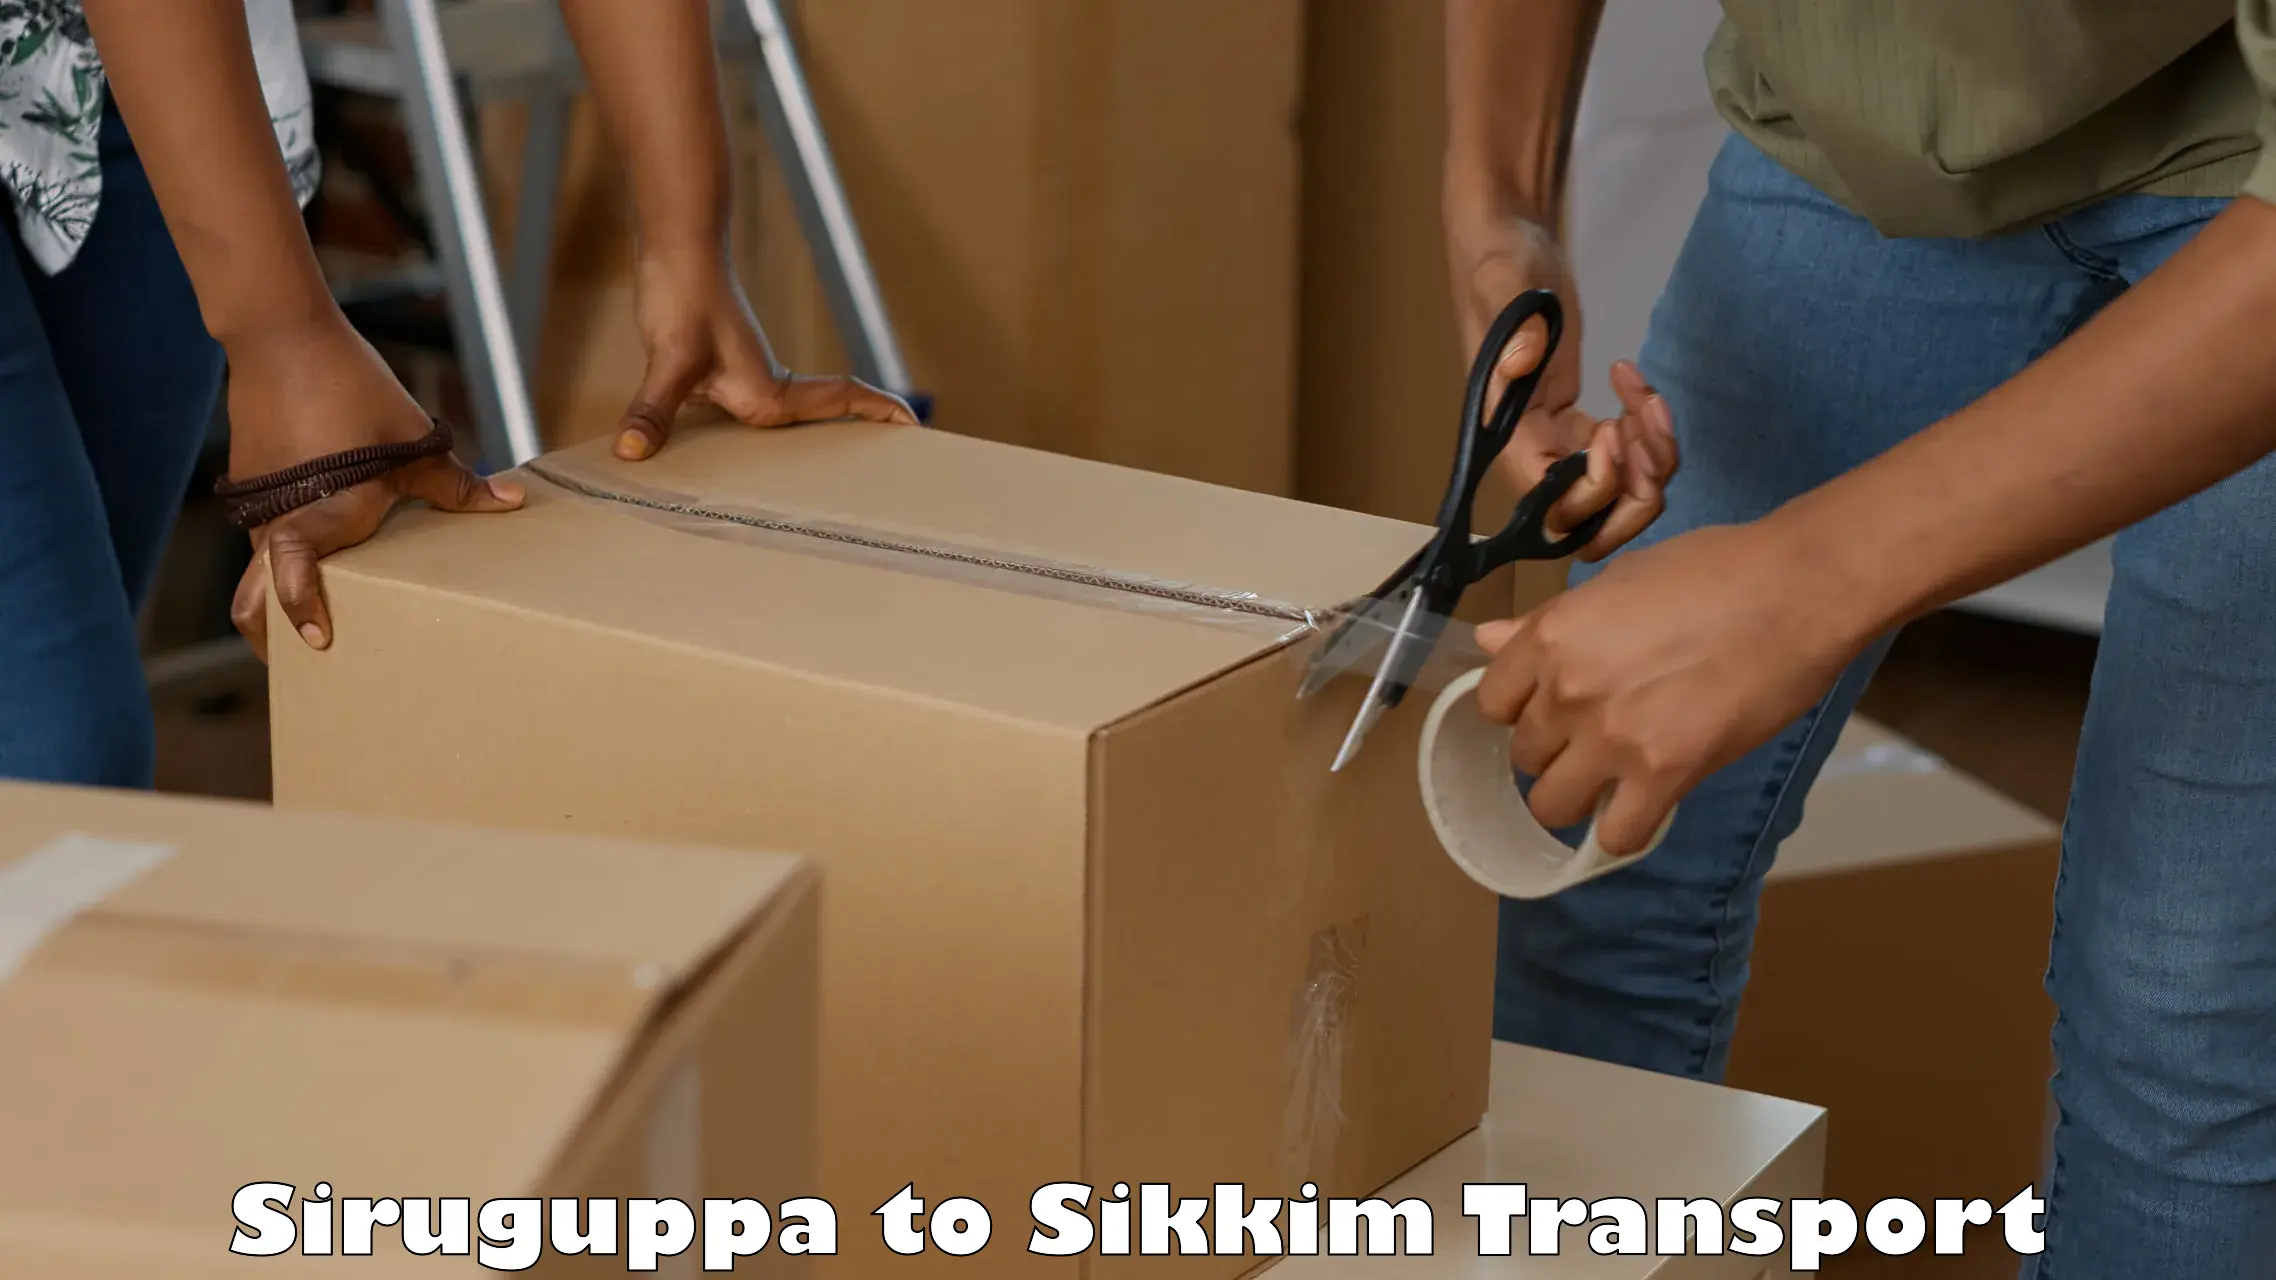 Truck transport companies in India Siruguppa to Pelling